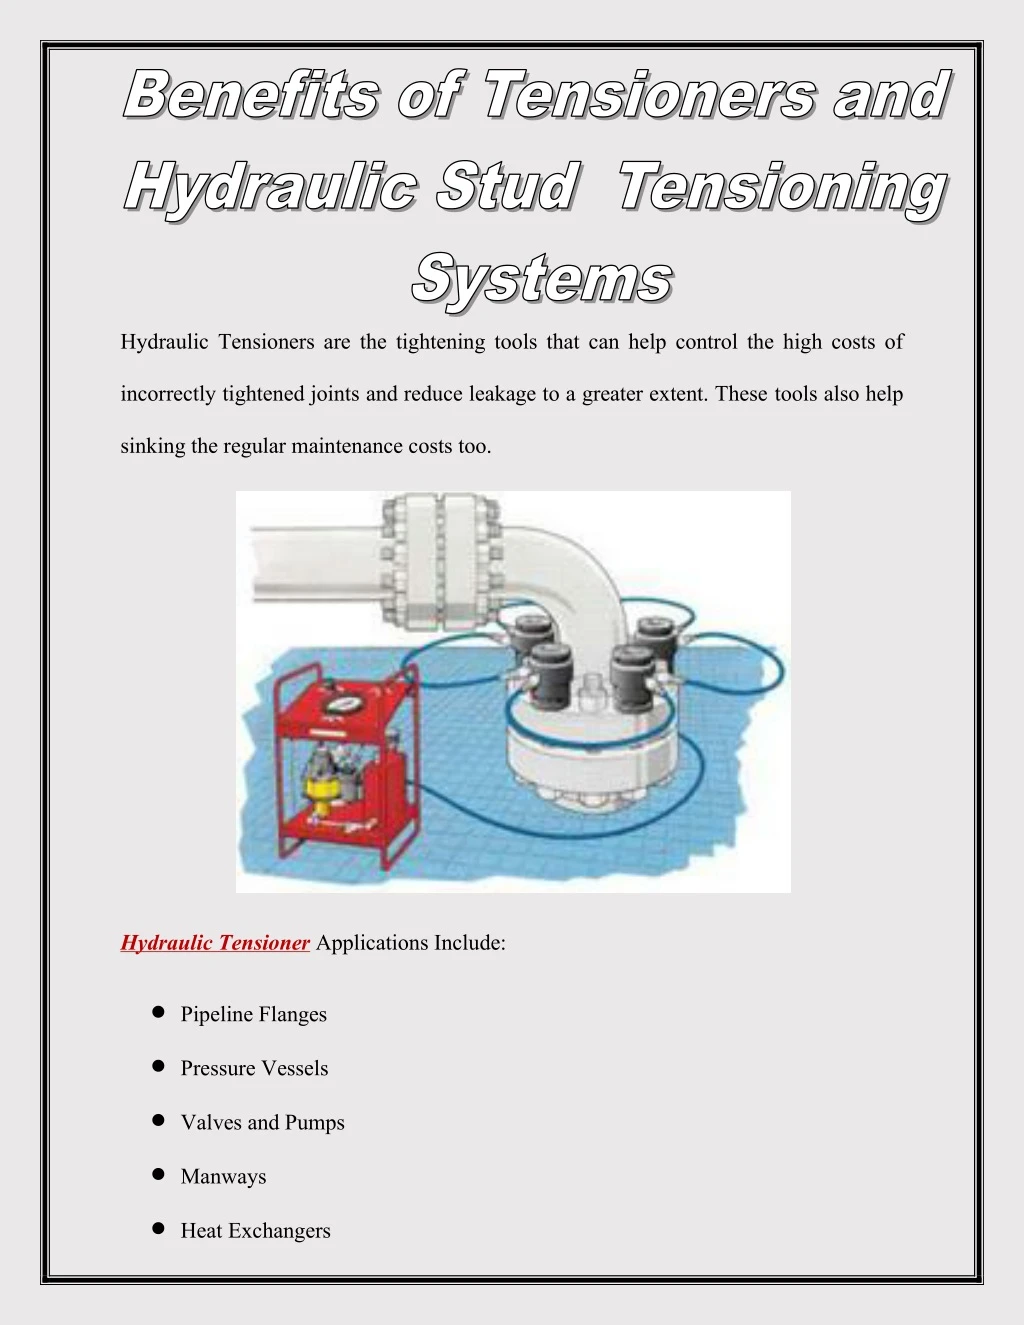 hydraulic tensioners are the tightening tools